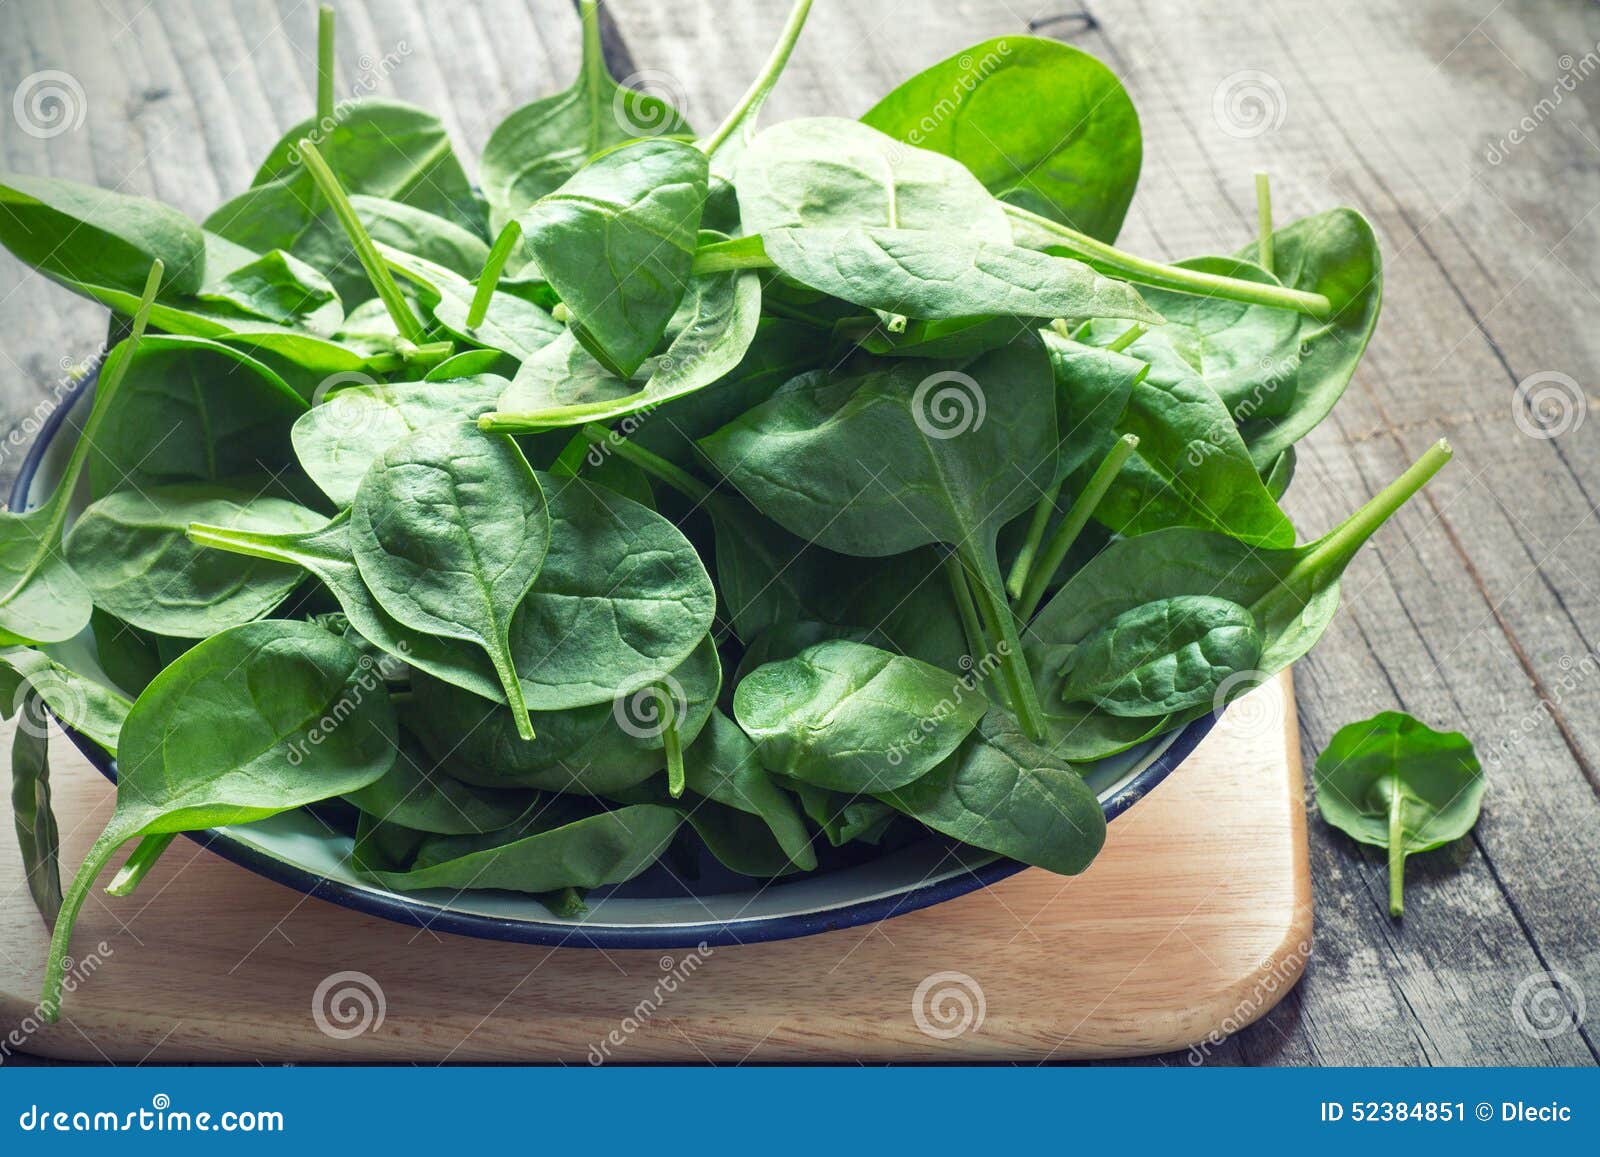 baby spinach